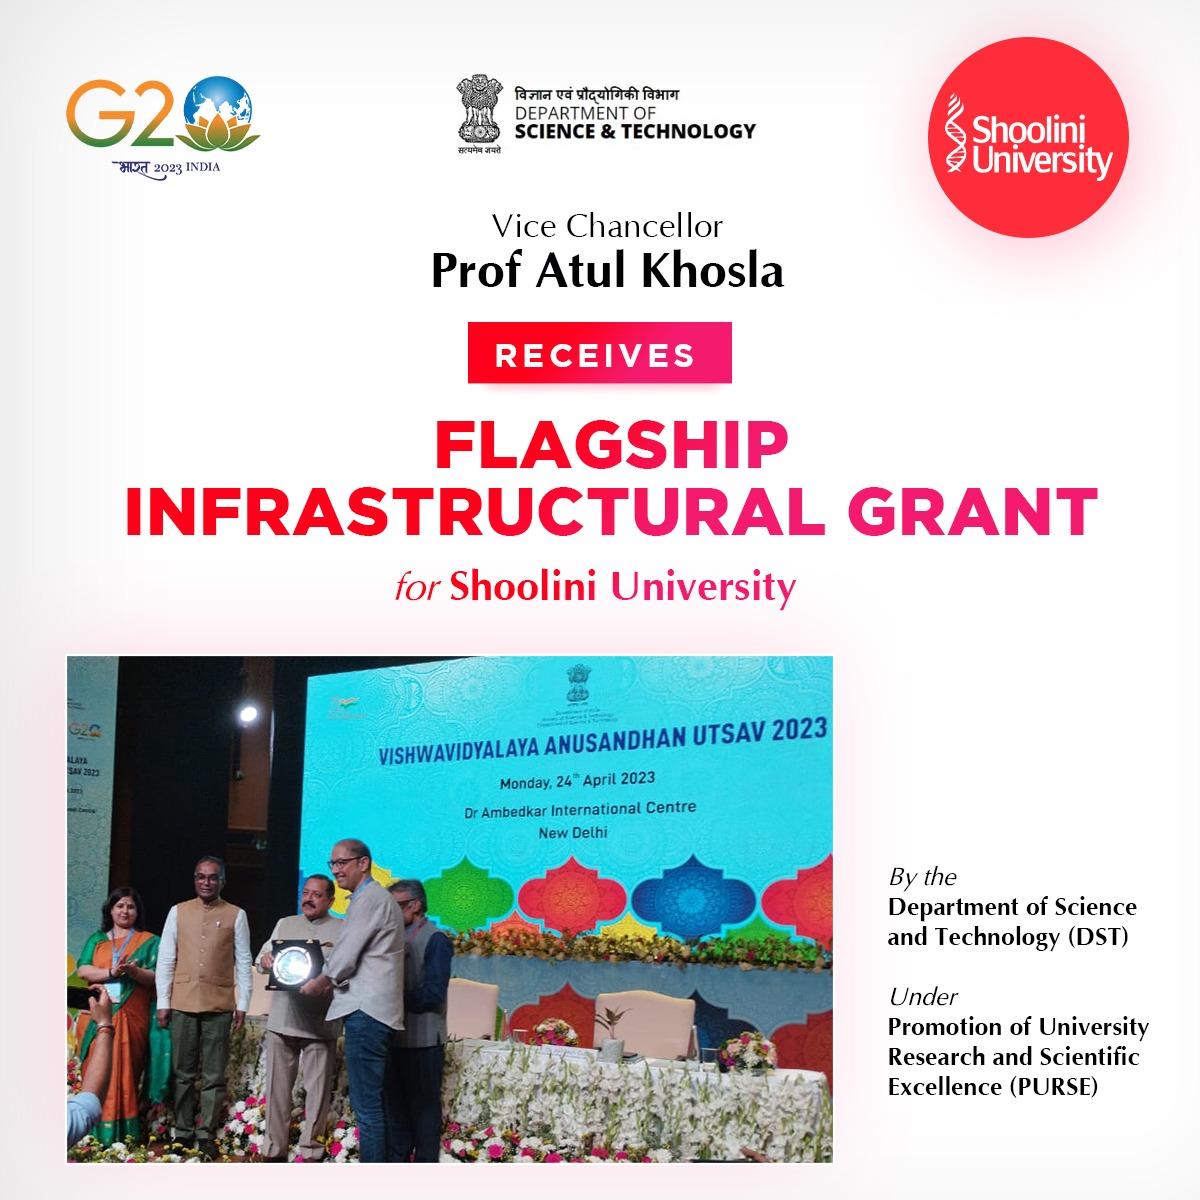 Rs 9 cr Infrastructural Grant for #ShooliniUniversity! ✨
Our Vice Chancellor, Prof Atul Khosla, was present at the prestigious Vishvavidhayala Anusaandhan Utsav 2023, Delhi, to receive the grant.
Congratulations Everyone! 🙏🏼

#researchuniversity #researchgrant #researchers